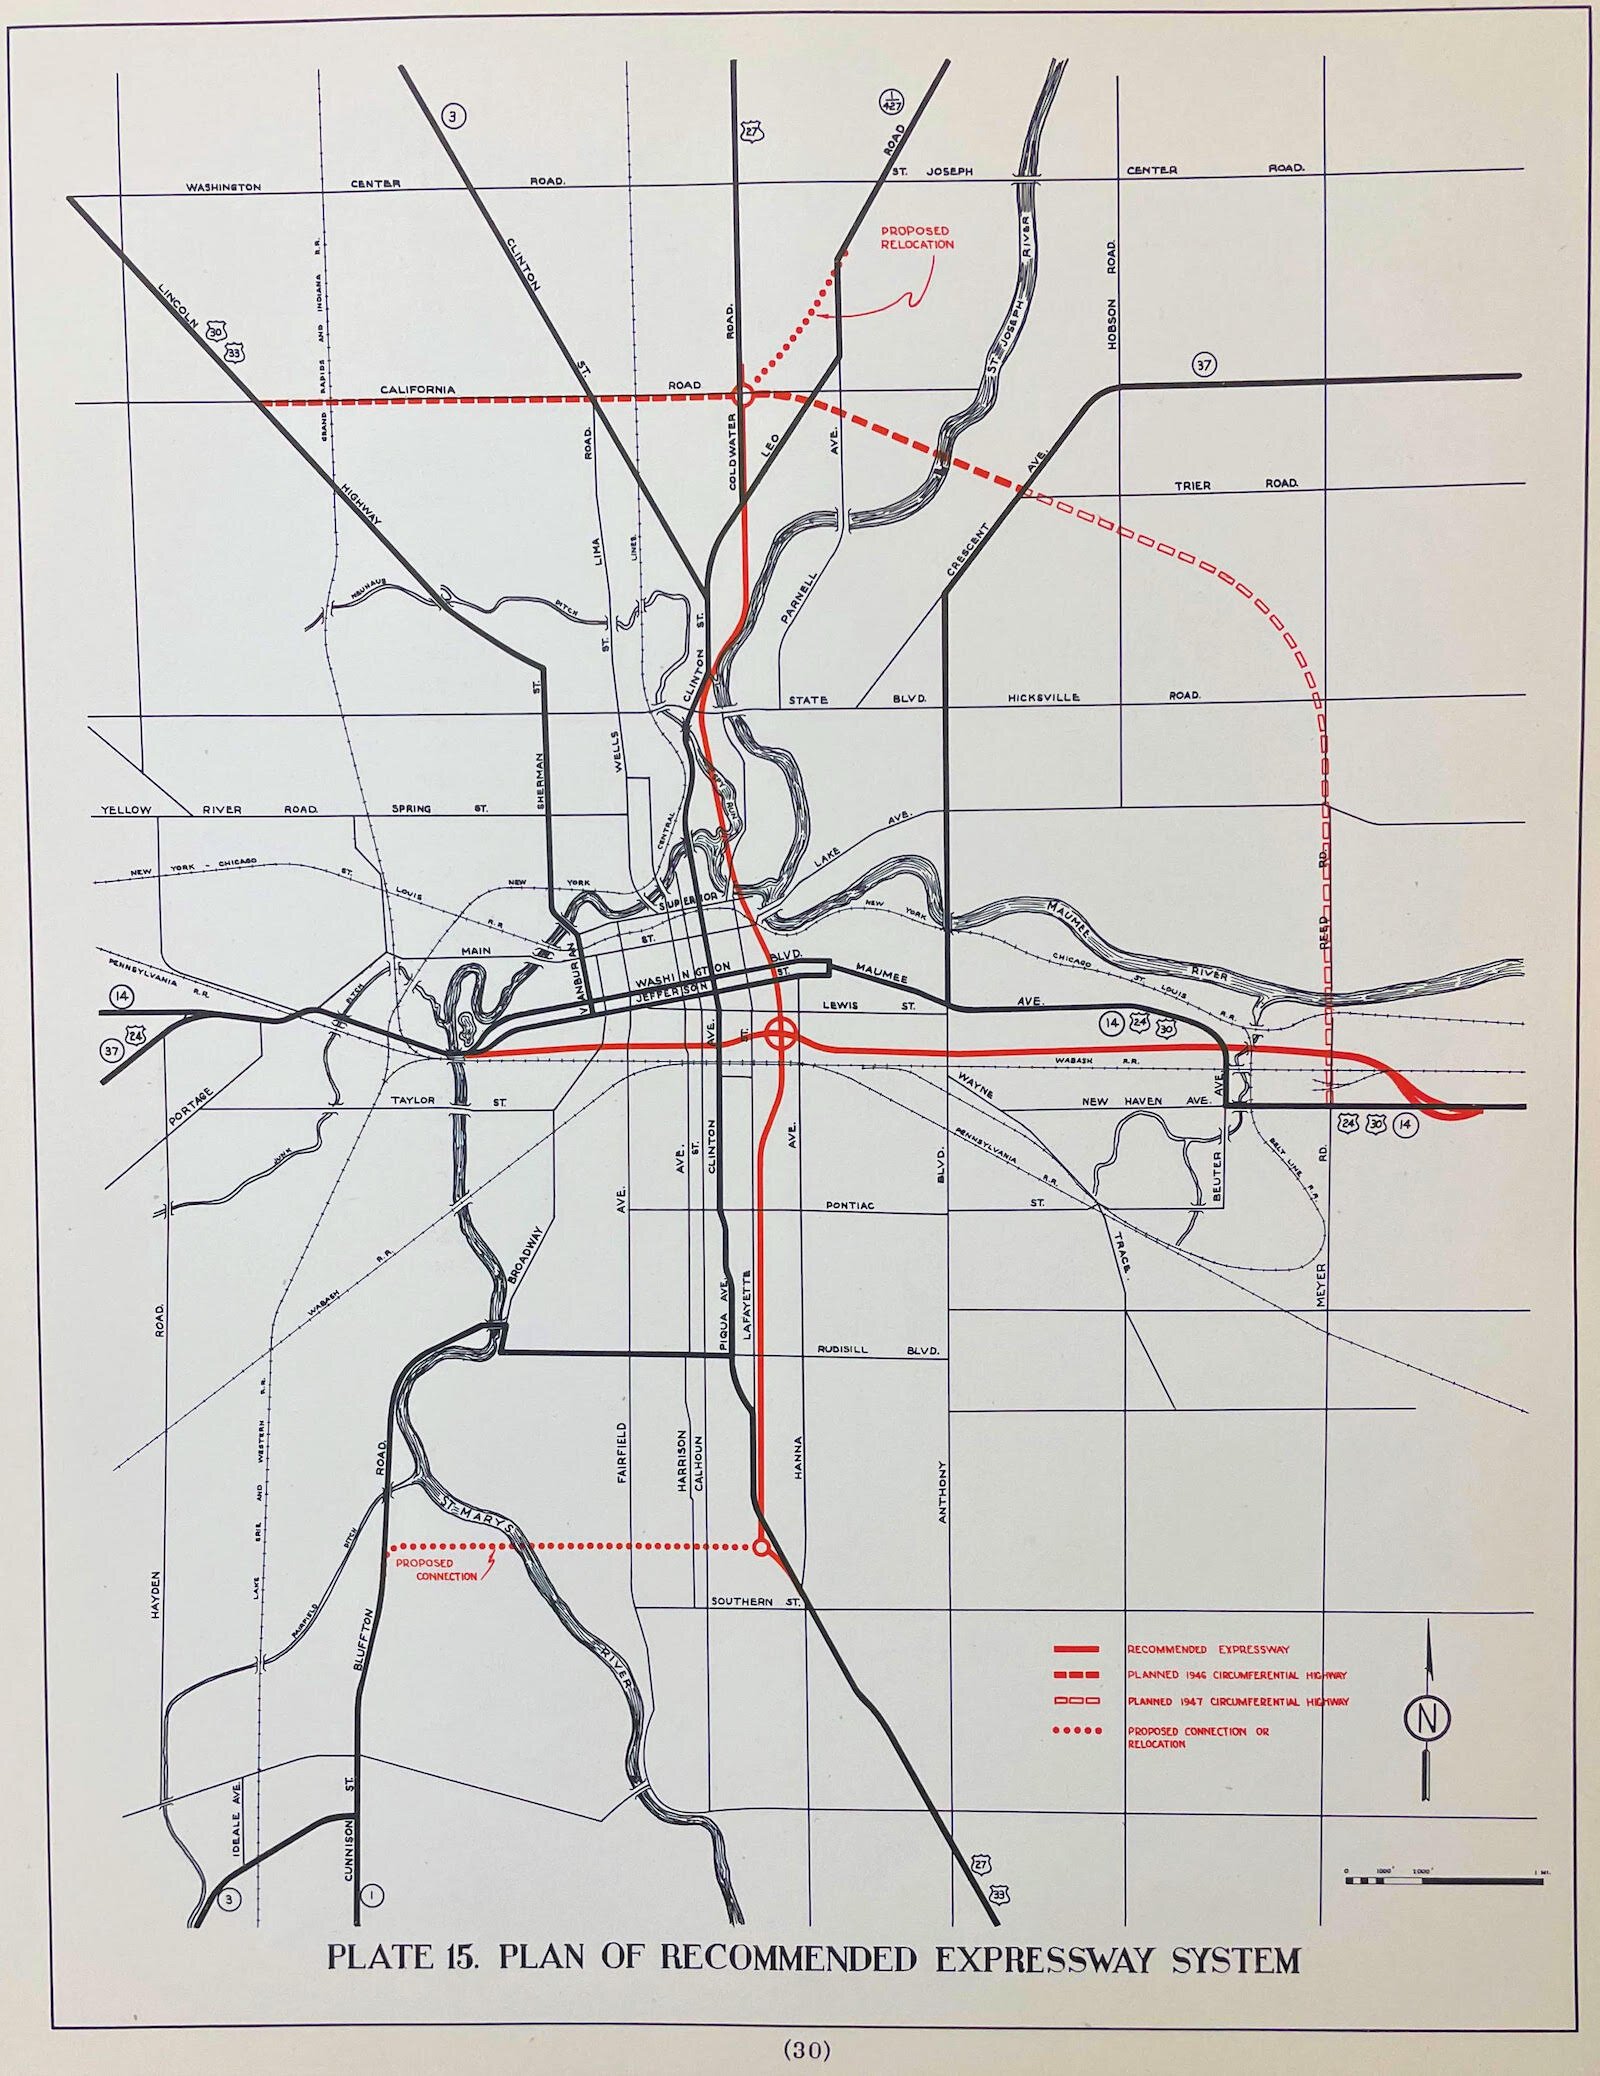 This map from the 1946 State Highway Commission plan shows the proposed path of both expressways. It also shows the path of a northern bypass, which became Coliseum Boulevard. Interestingly, this proposal routed the northern bypass along Reed Road. 